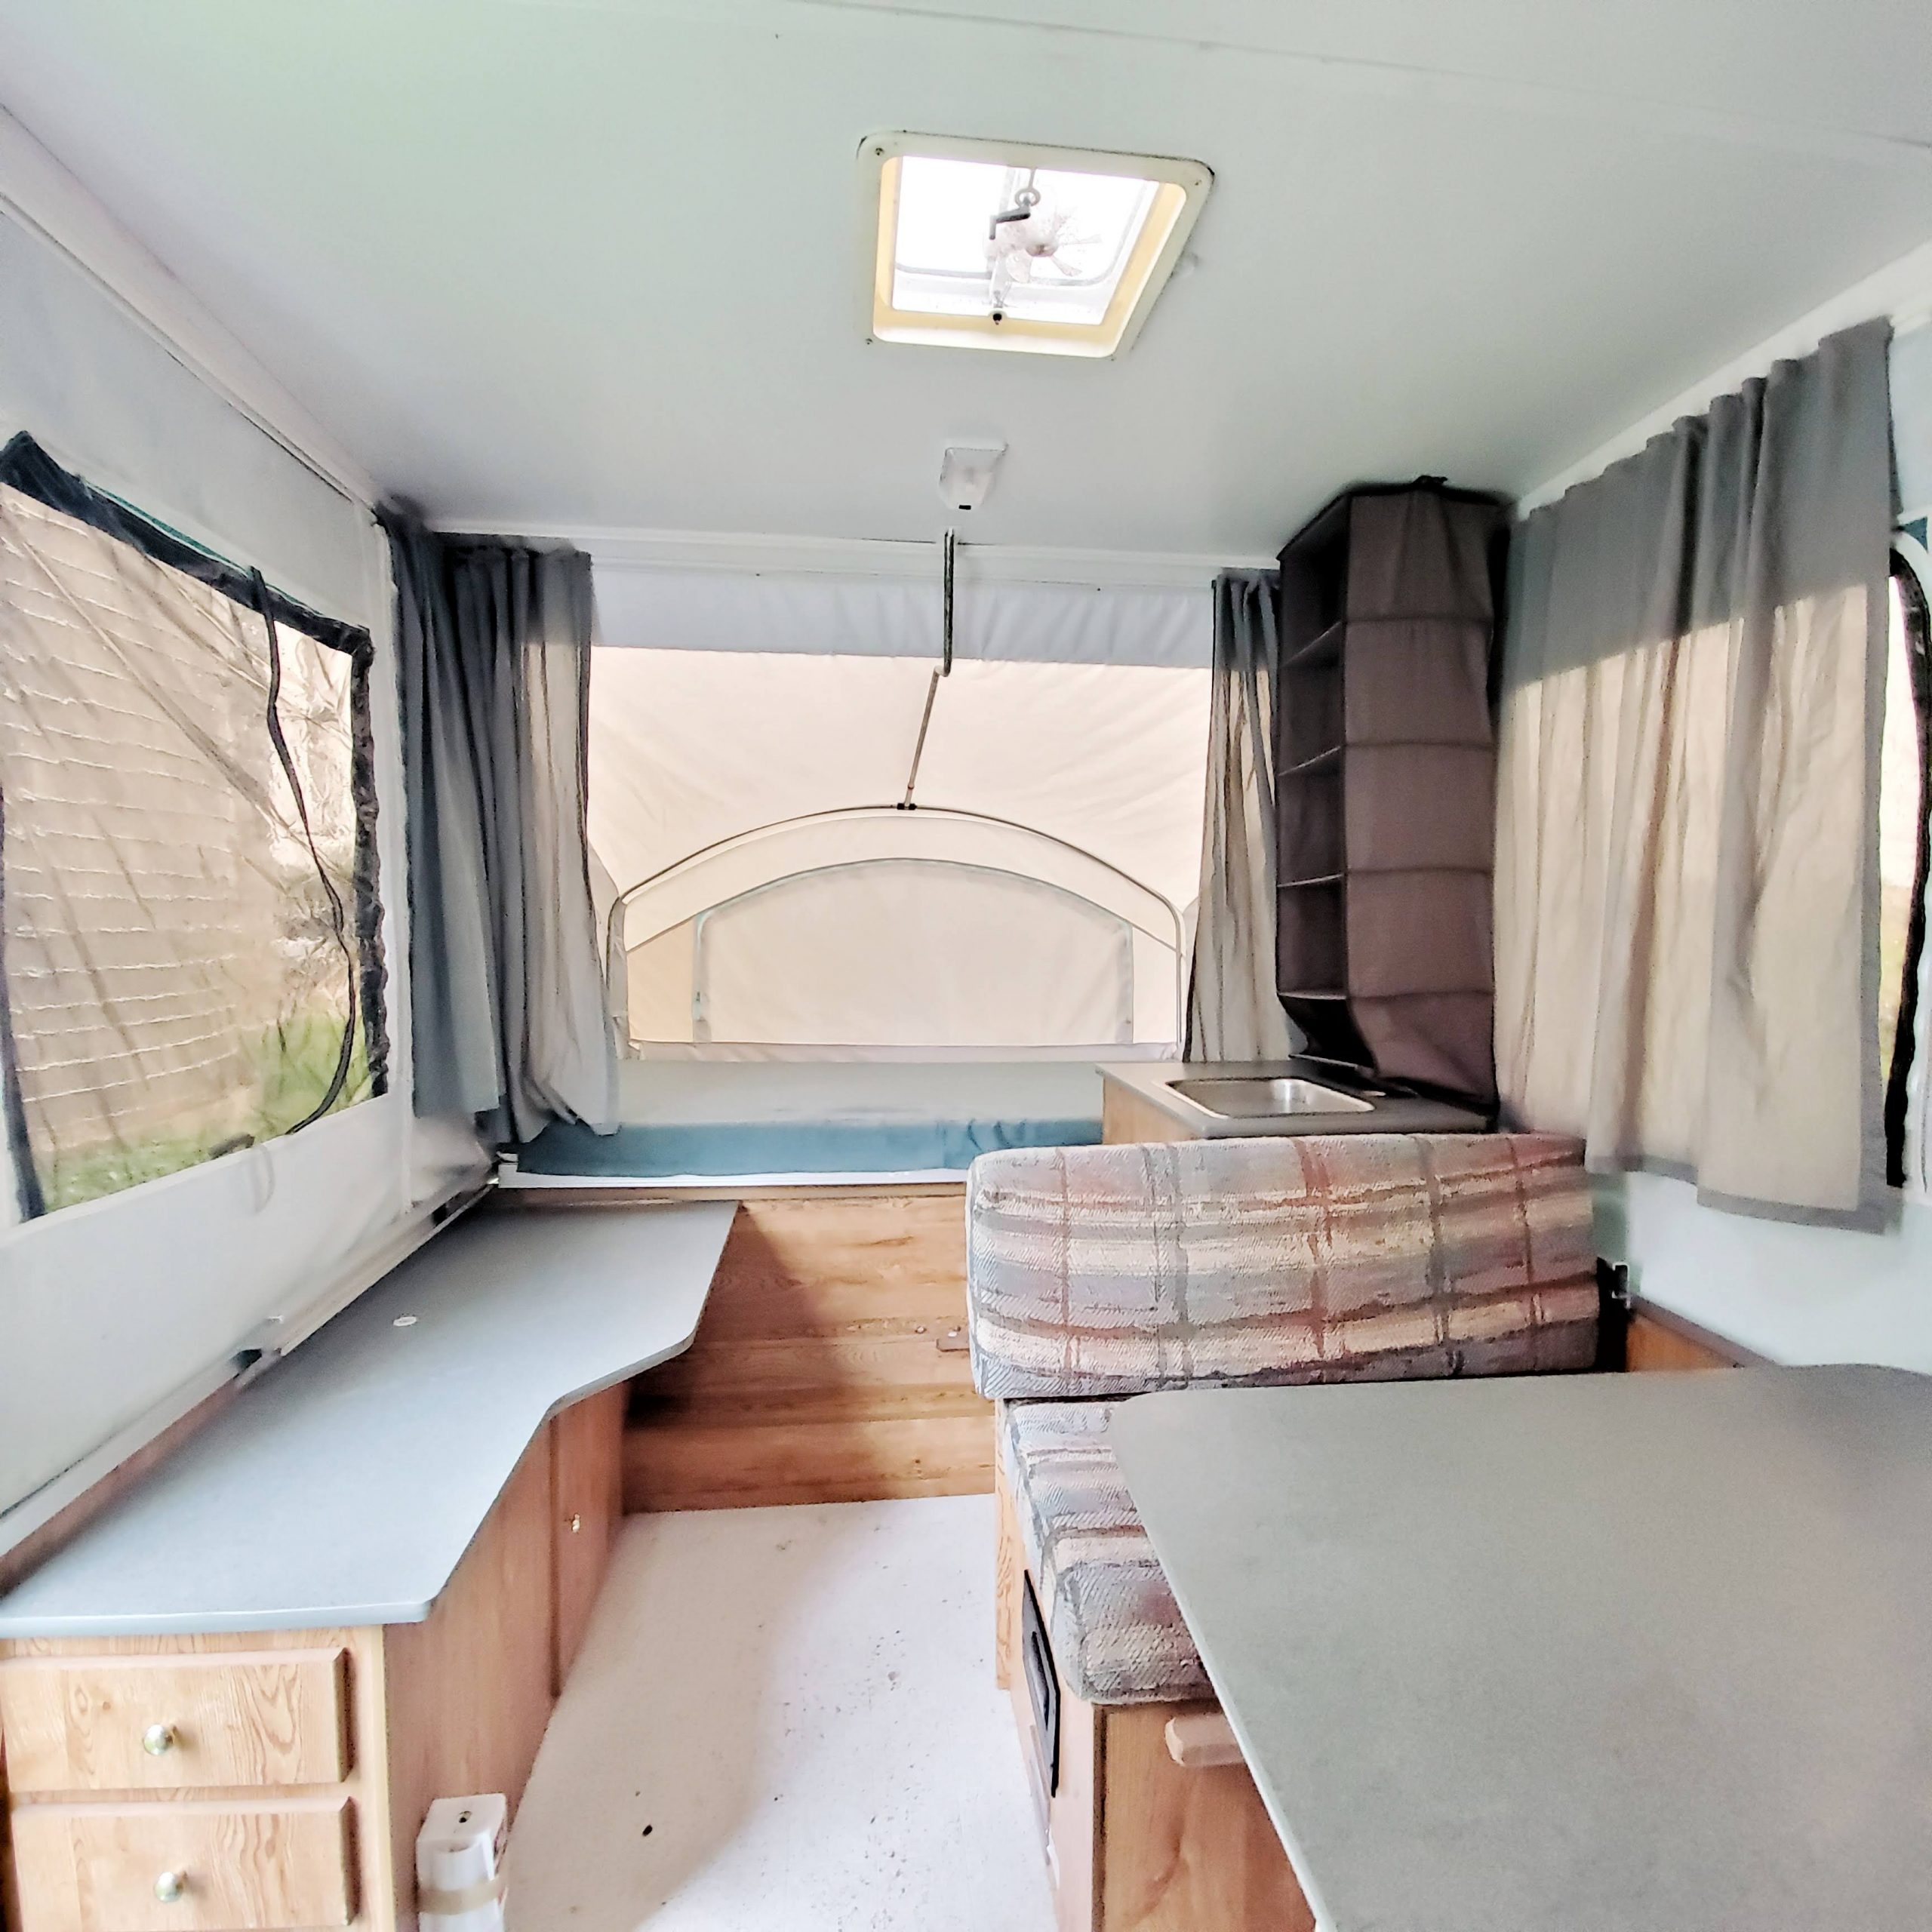 Update your RV with a modern farmhouse look with gray painted cabinets, curtains, a new wood stained table, and updated countertops for less than $500!